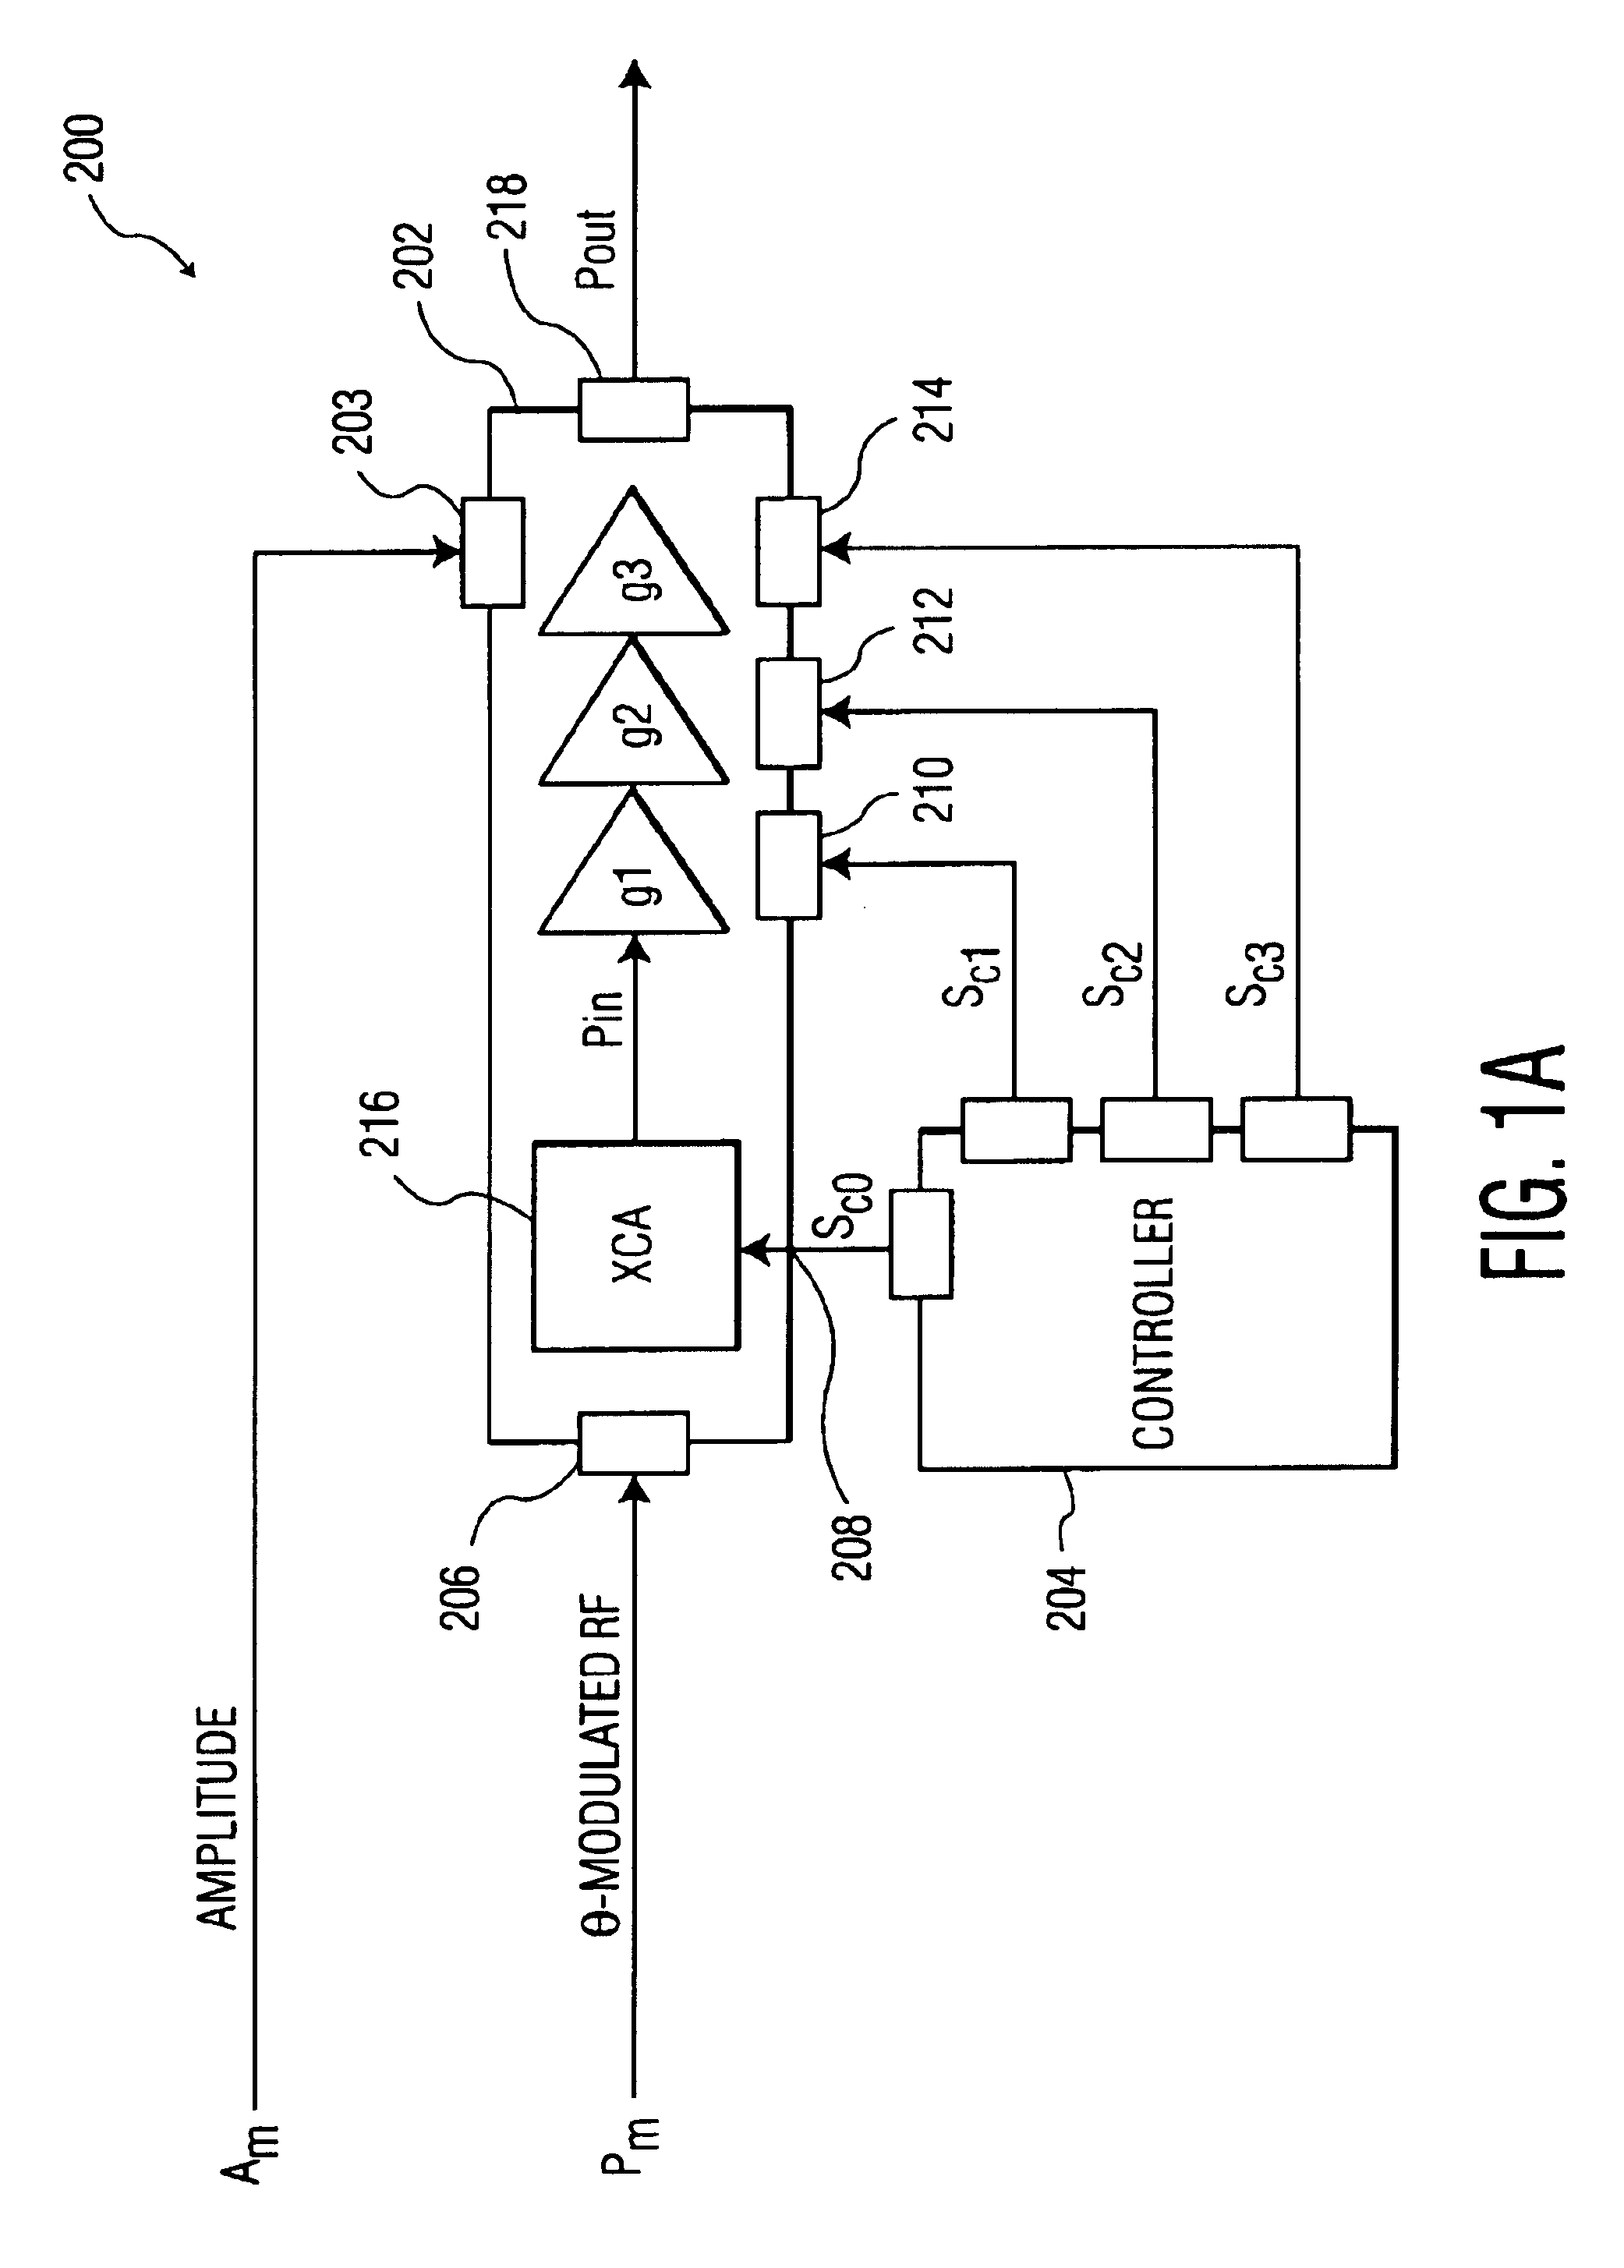 Apparatus, methods and articles of manufacture for control in an electromagnetic processor